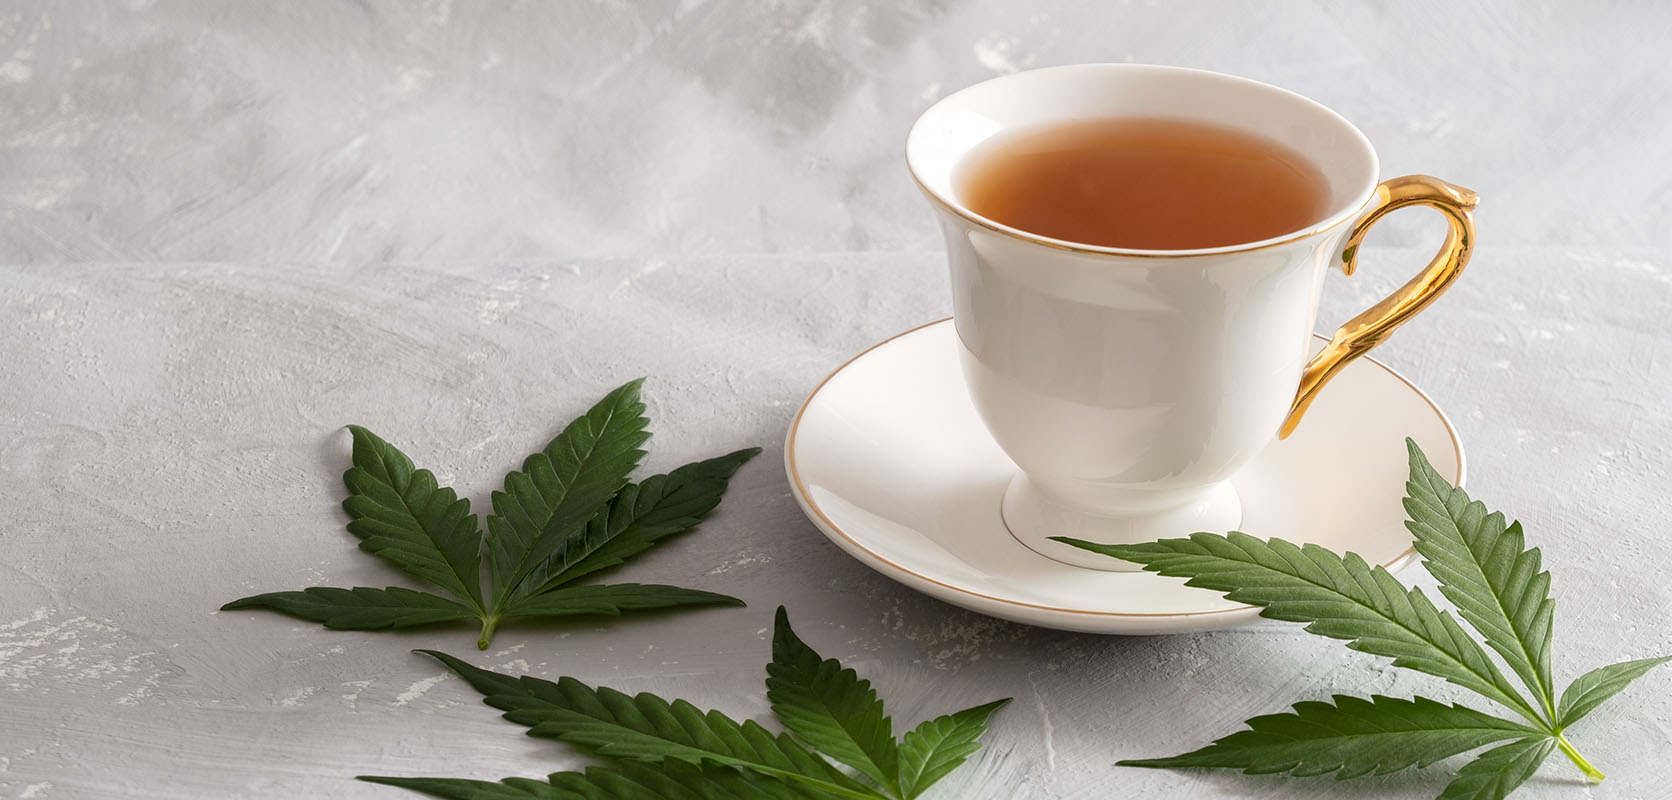 weed tea surrounded by cannabis leaves from an online dispensary in Canada for dispensary weed, THC edibles, gummys, and shatter. Buy weed online.